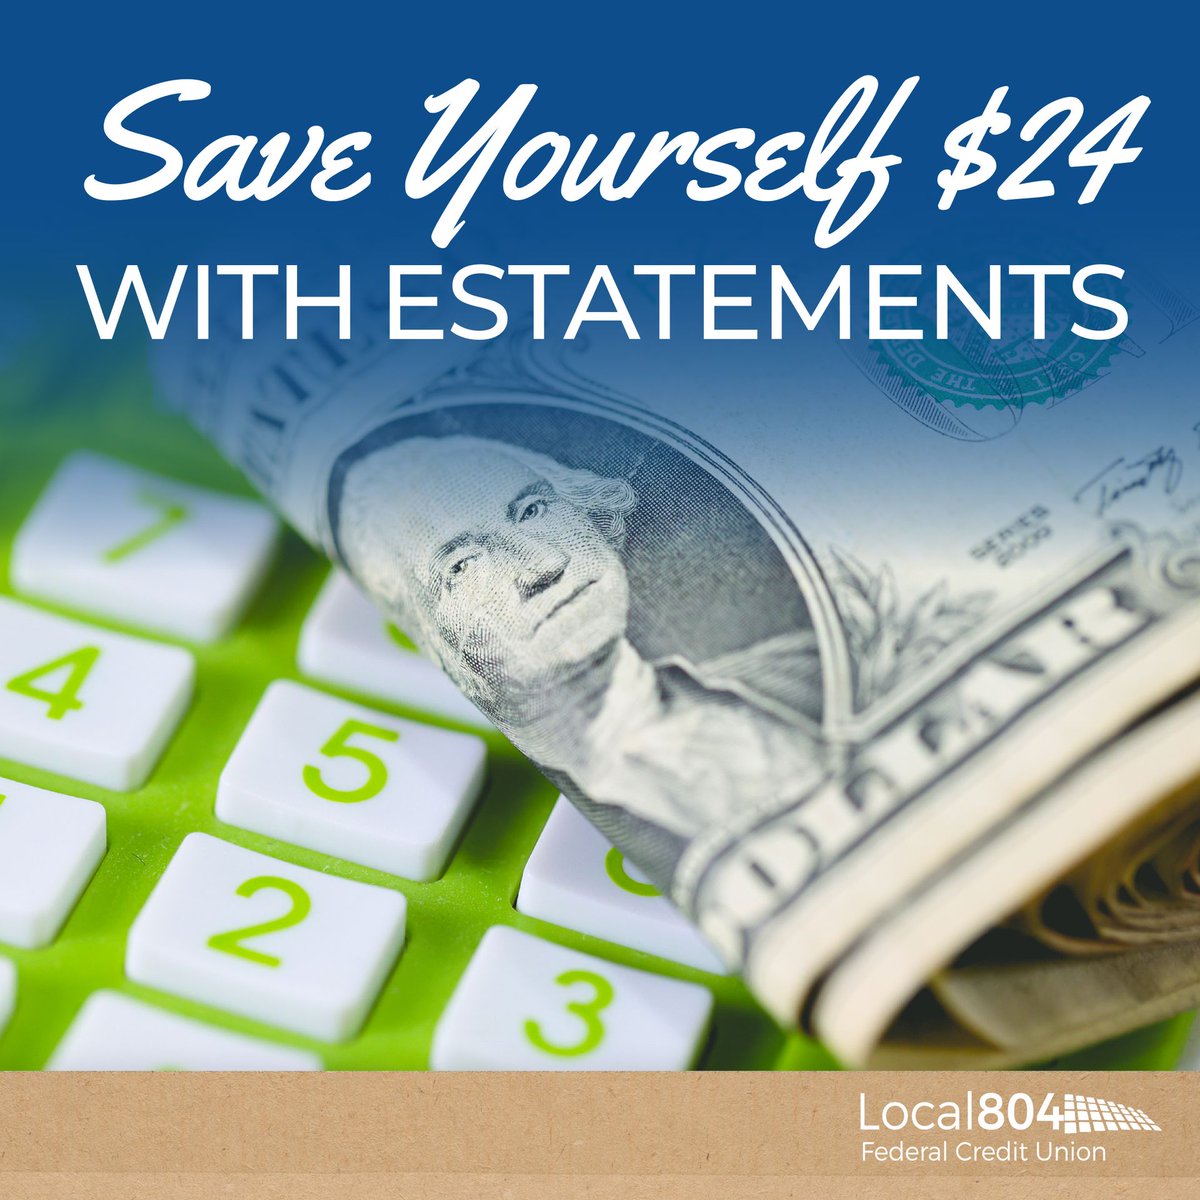 Save $24 when you make the switch to e-statements! Learn more - bit.ly/44tcPsH

#TeamstersLocal804 #Teamsters #UPS #local447IAMAW @Teamsters_Local_804 @804_Local